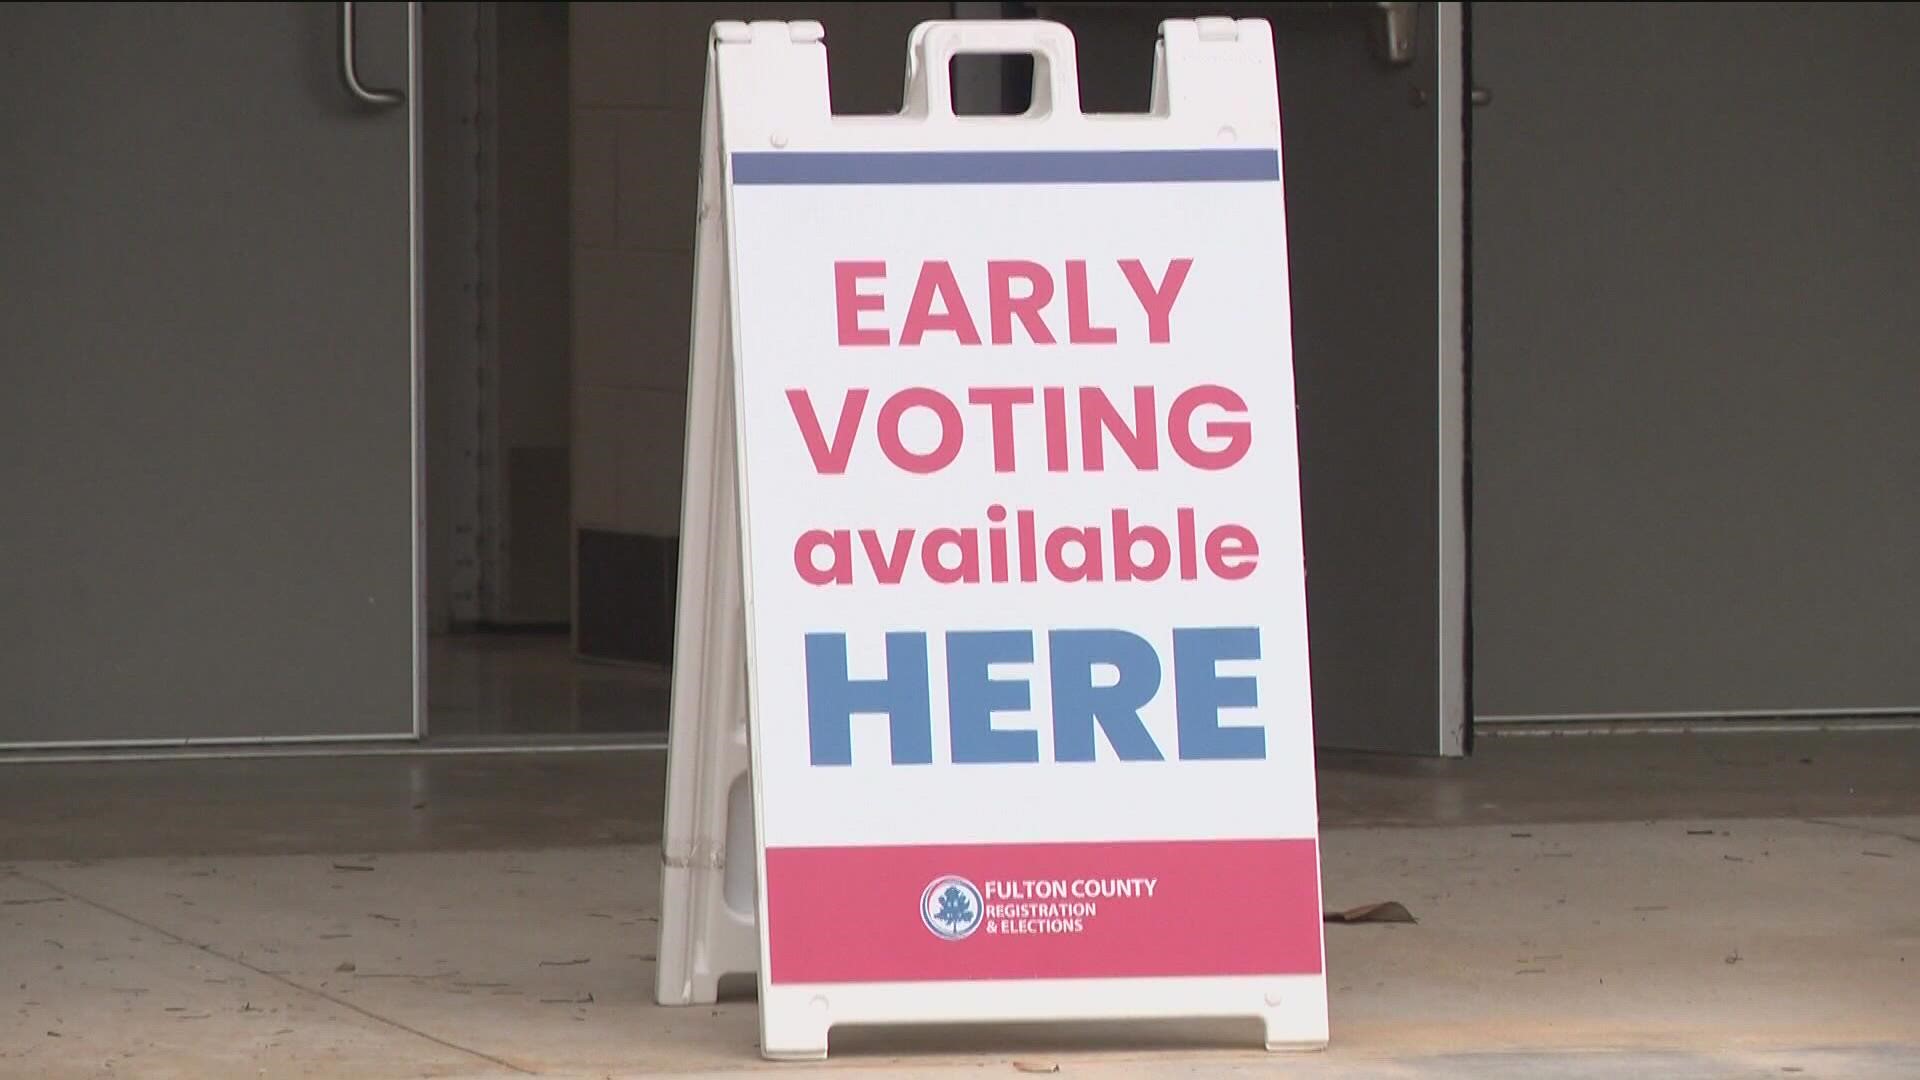 The Carter Center said it would be observing several key elements of the election process in Fulton County.